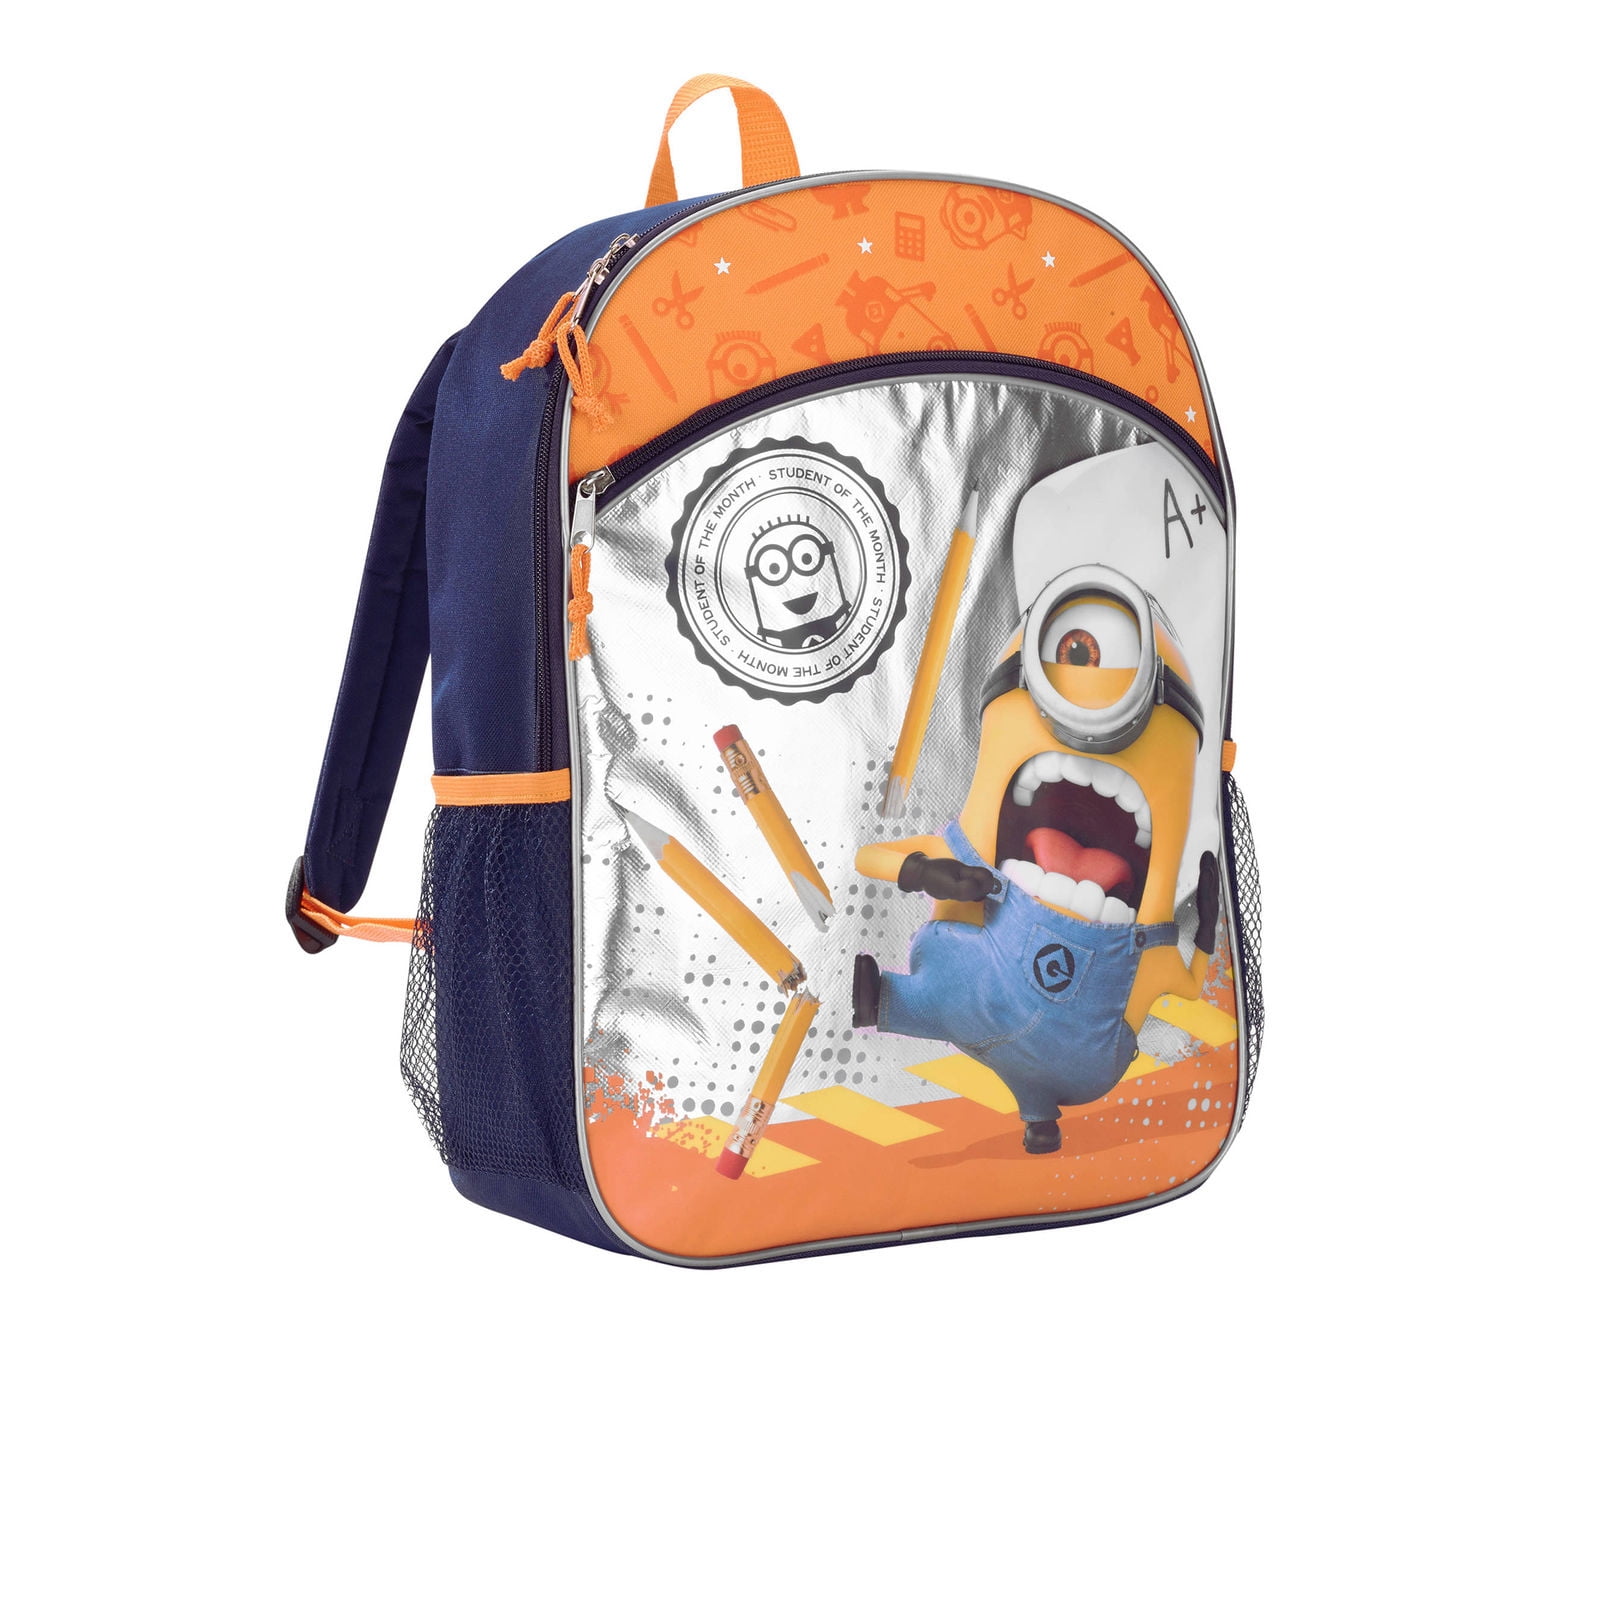 minion backpack